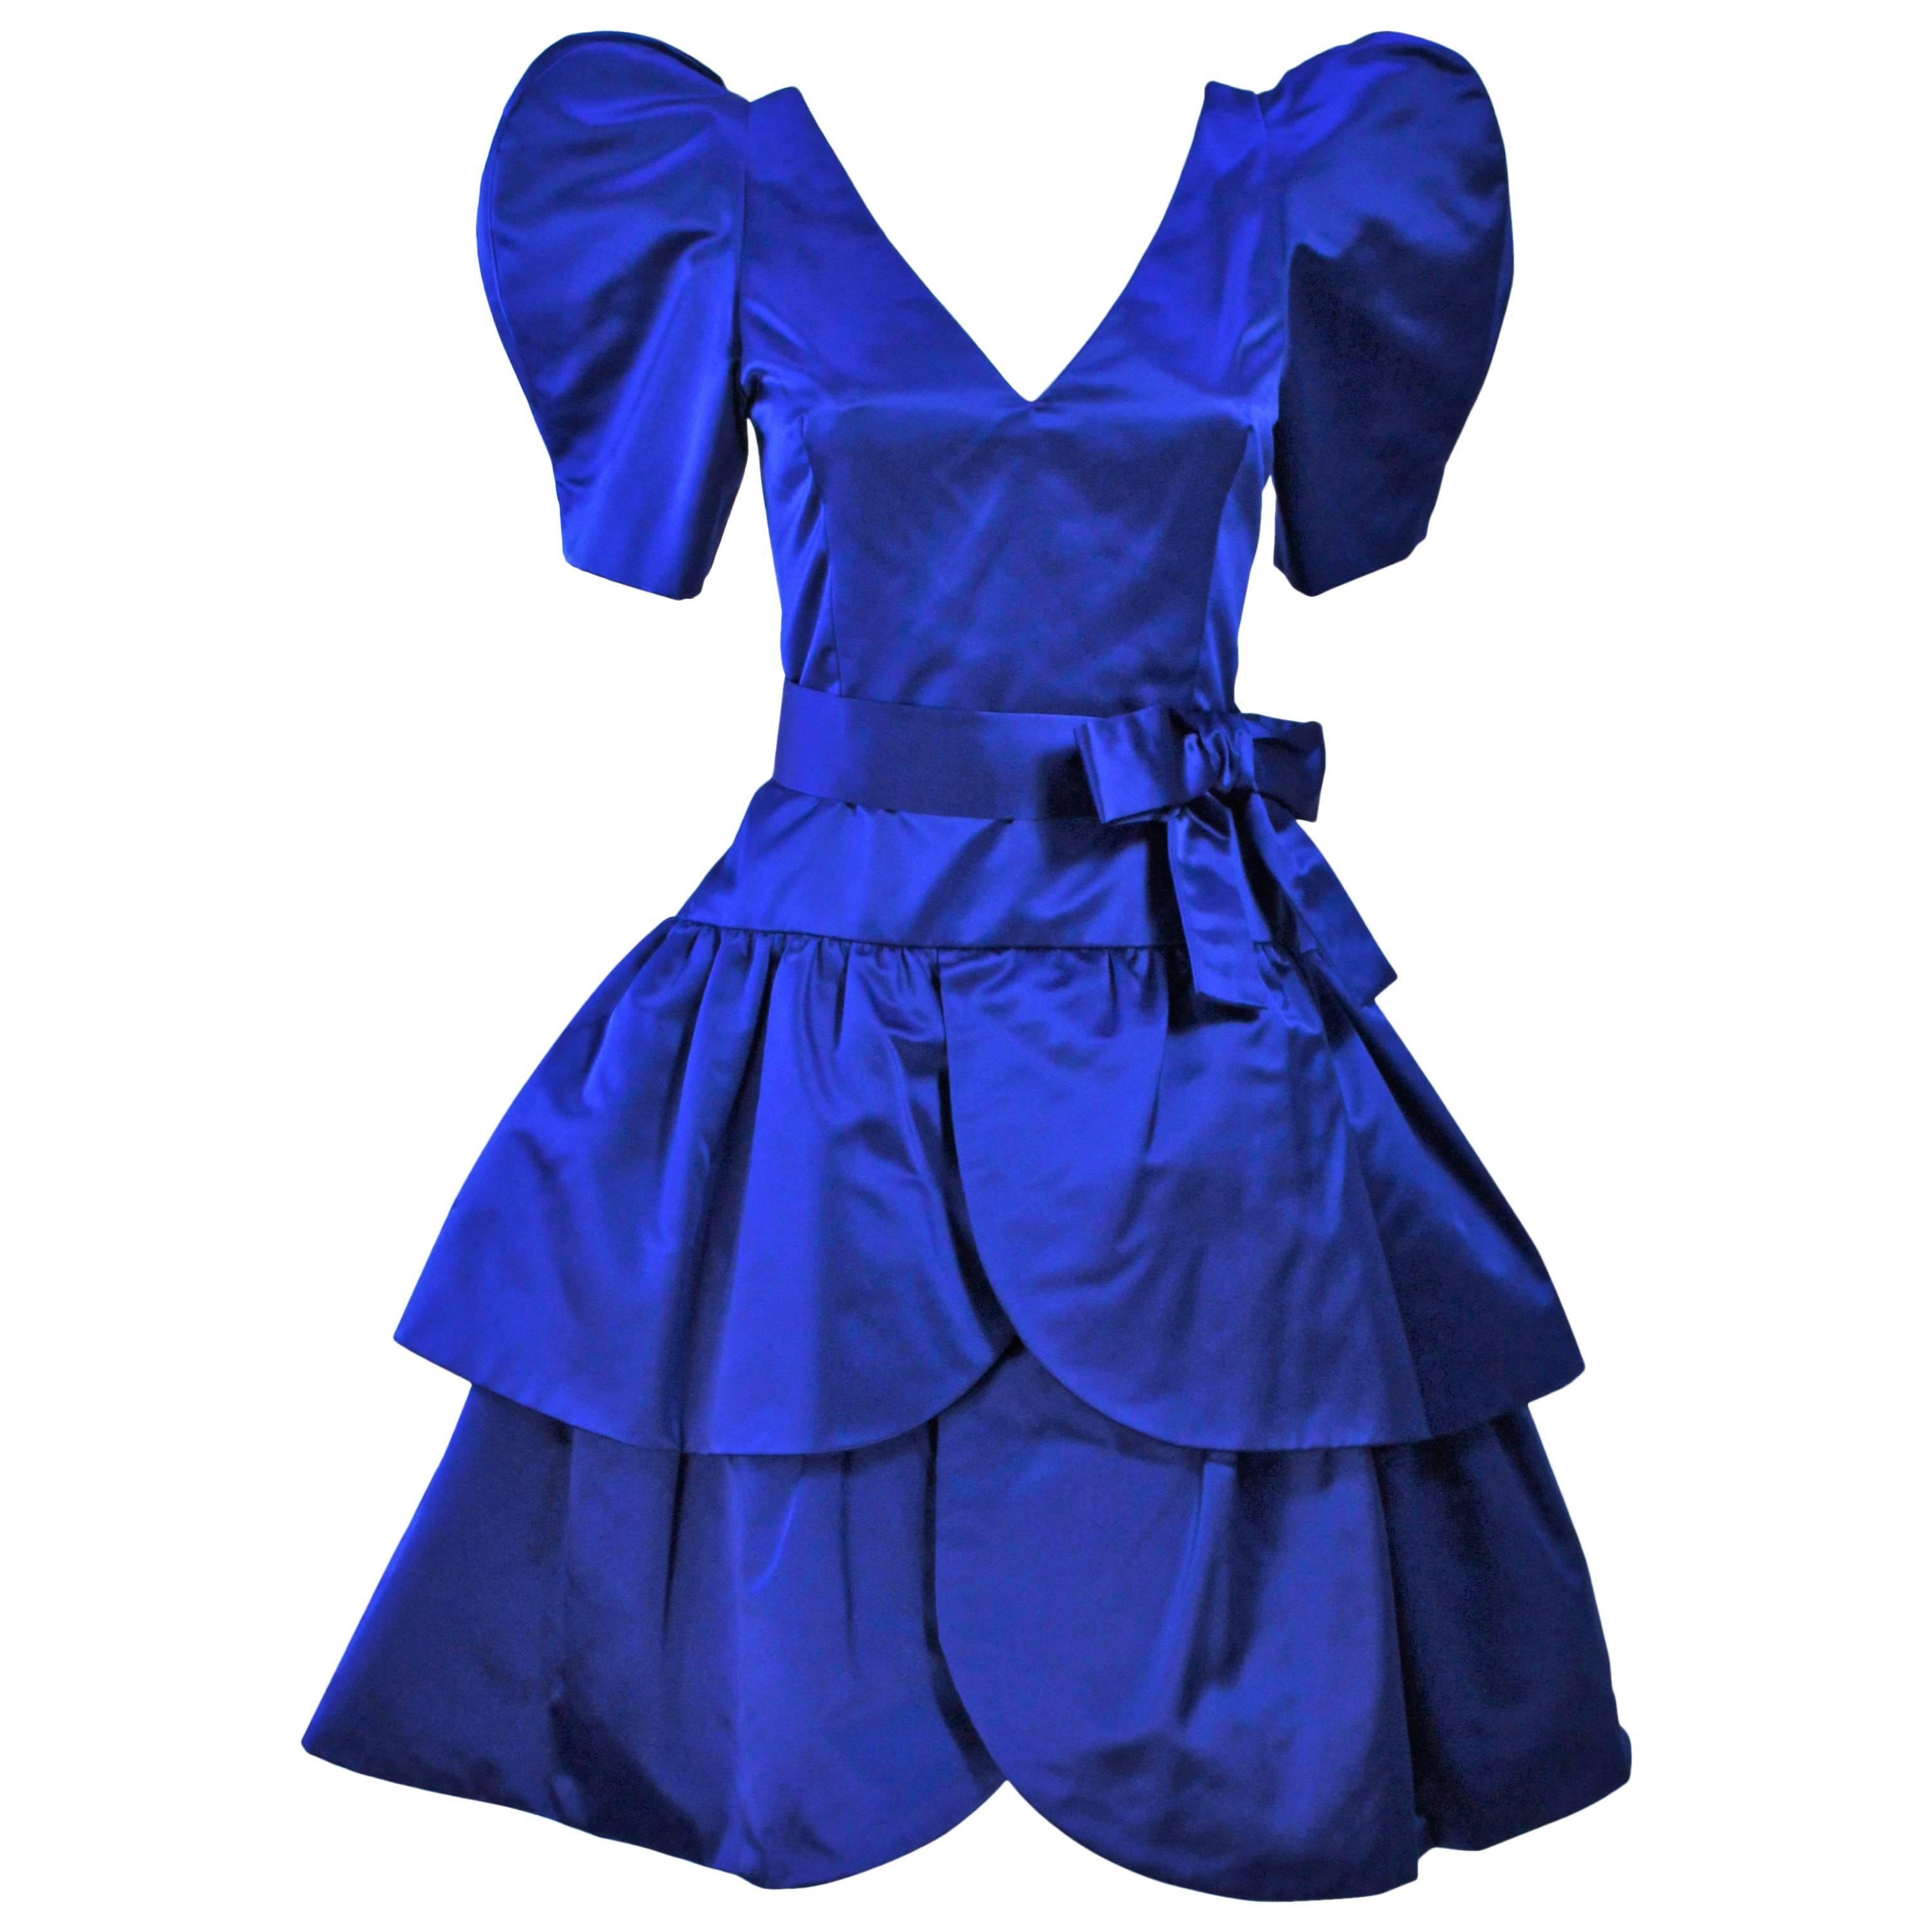 ARNOLD SCAASI Blue Satin Cocktail Dress with Bow Size 8 For Sale